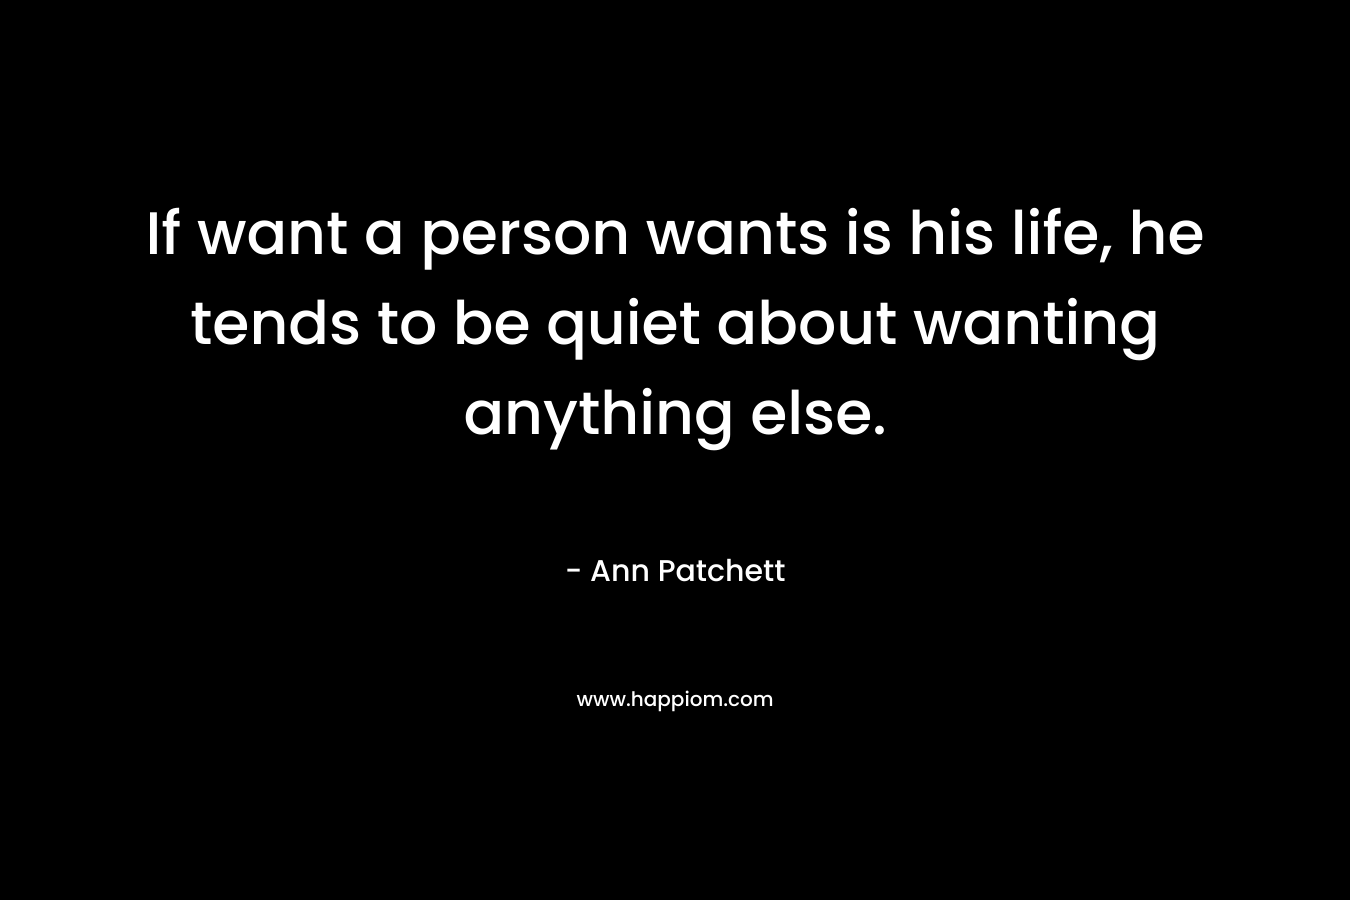 If want a person wants is his life, he tends to be quiet about wanting anything else. – Ann Patchett